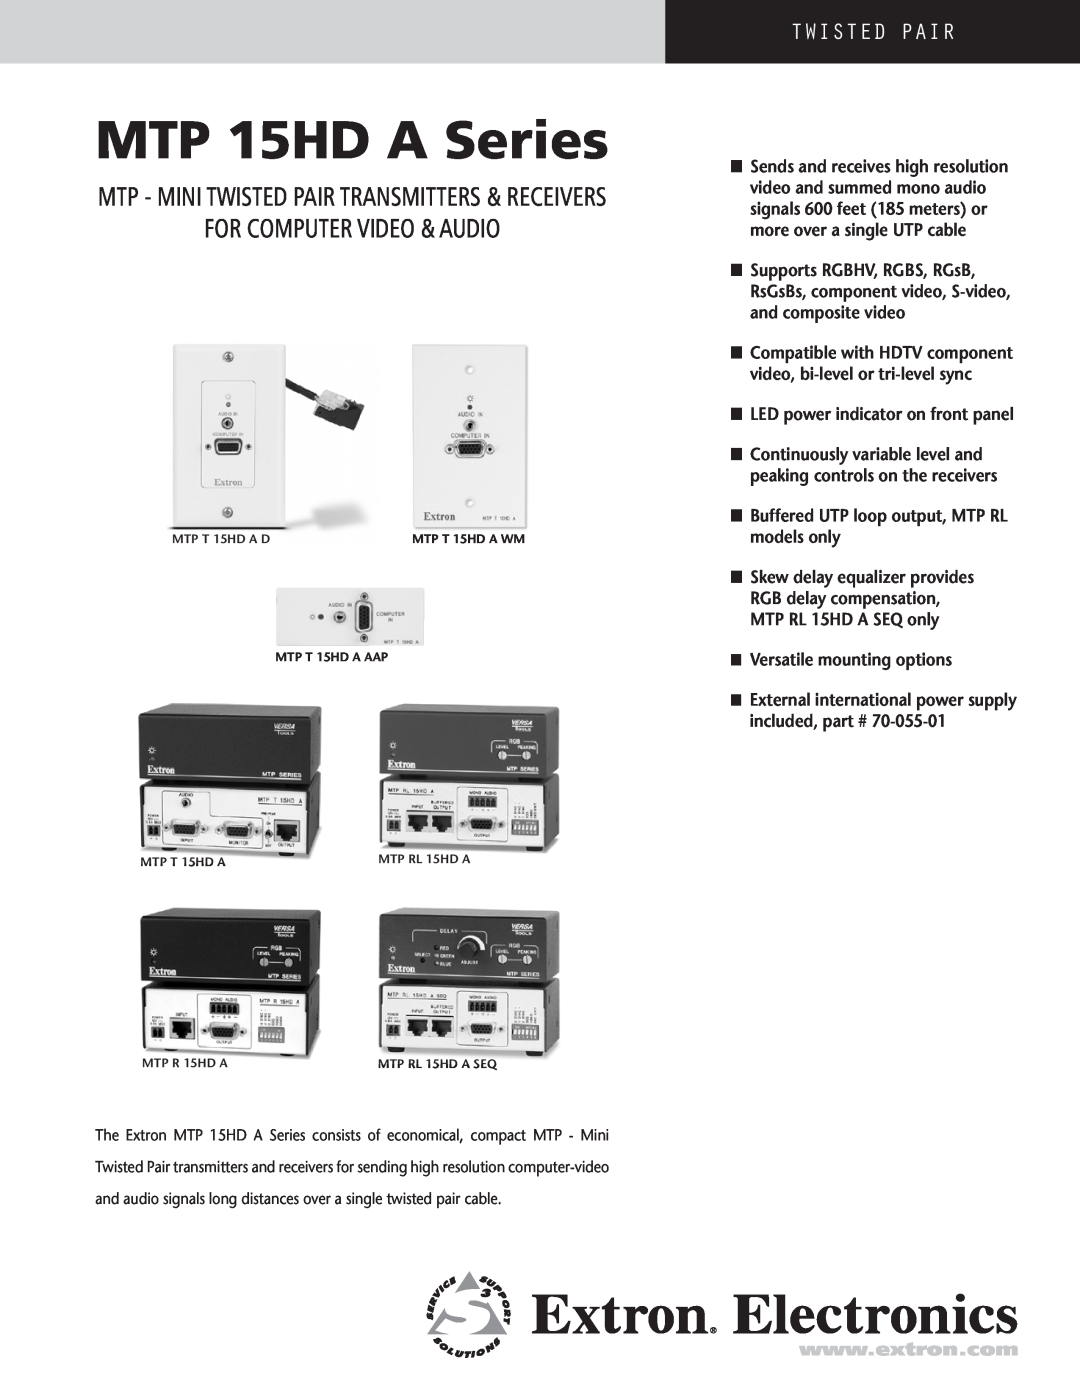 Extron electronic MTPT 15HD A AP, MTPT 15HD AD manual For Computer Video & Audio, MTP 15HD A Series, Twisted Pair 